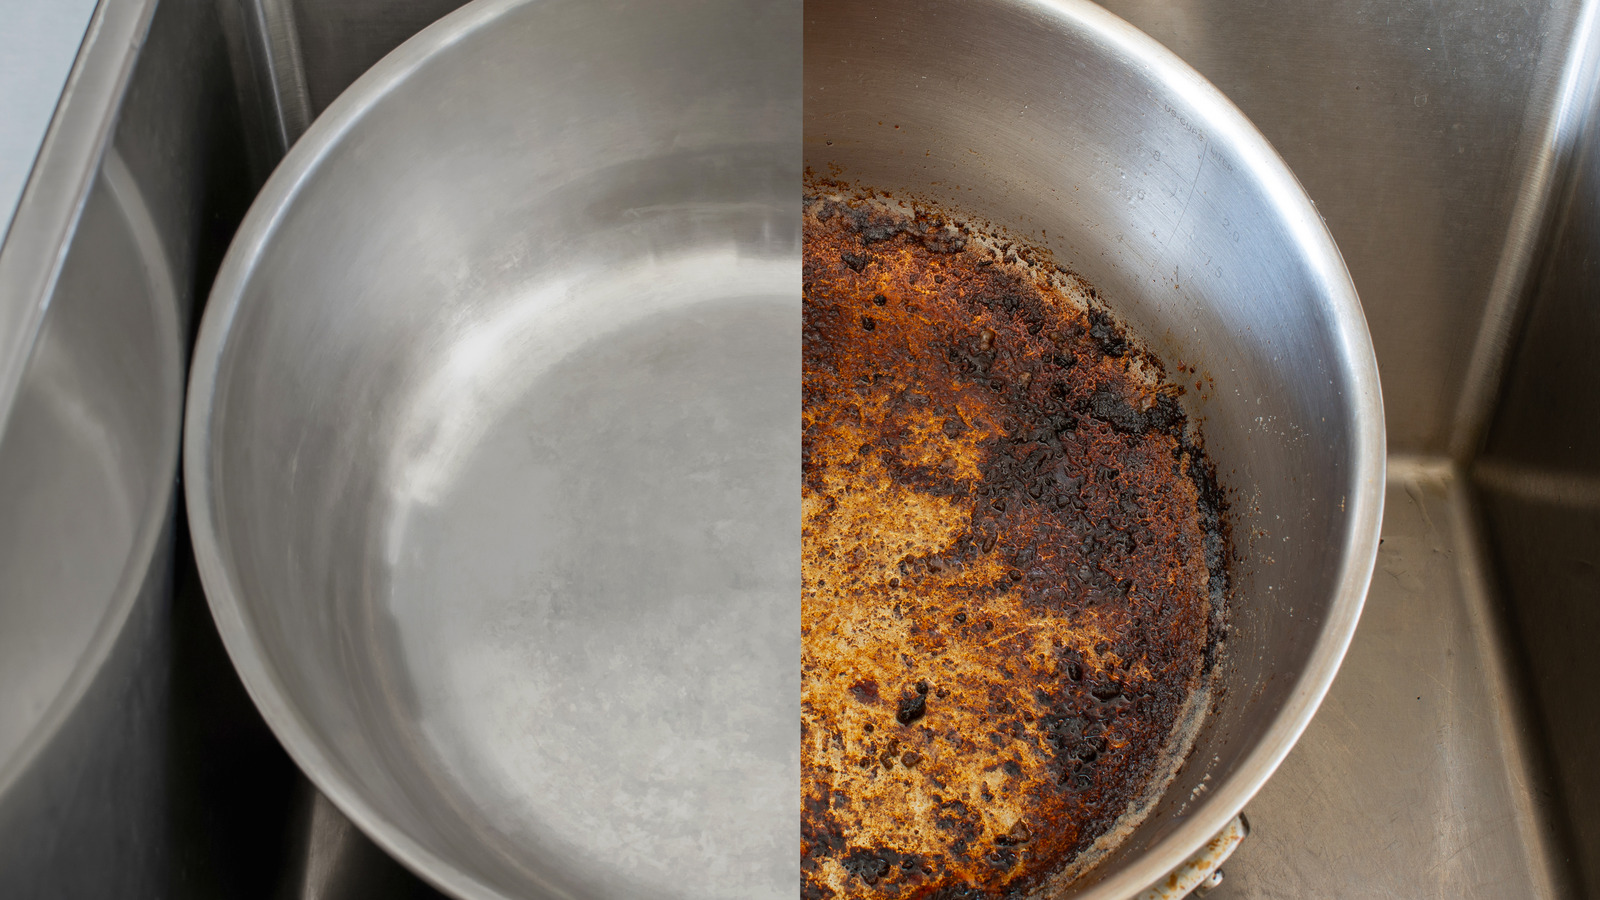 Chalky Residue On Stainless Steel Cookware?